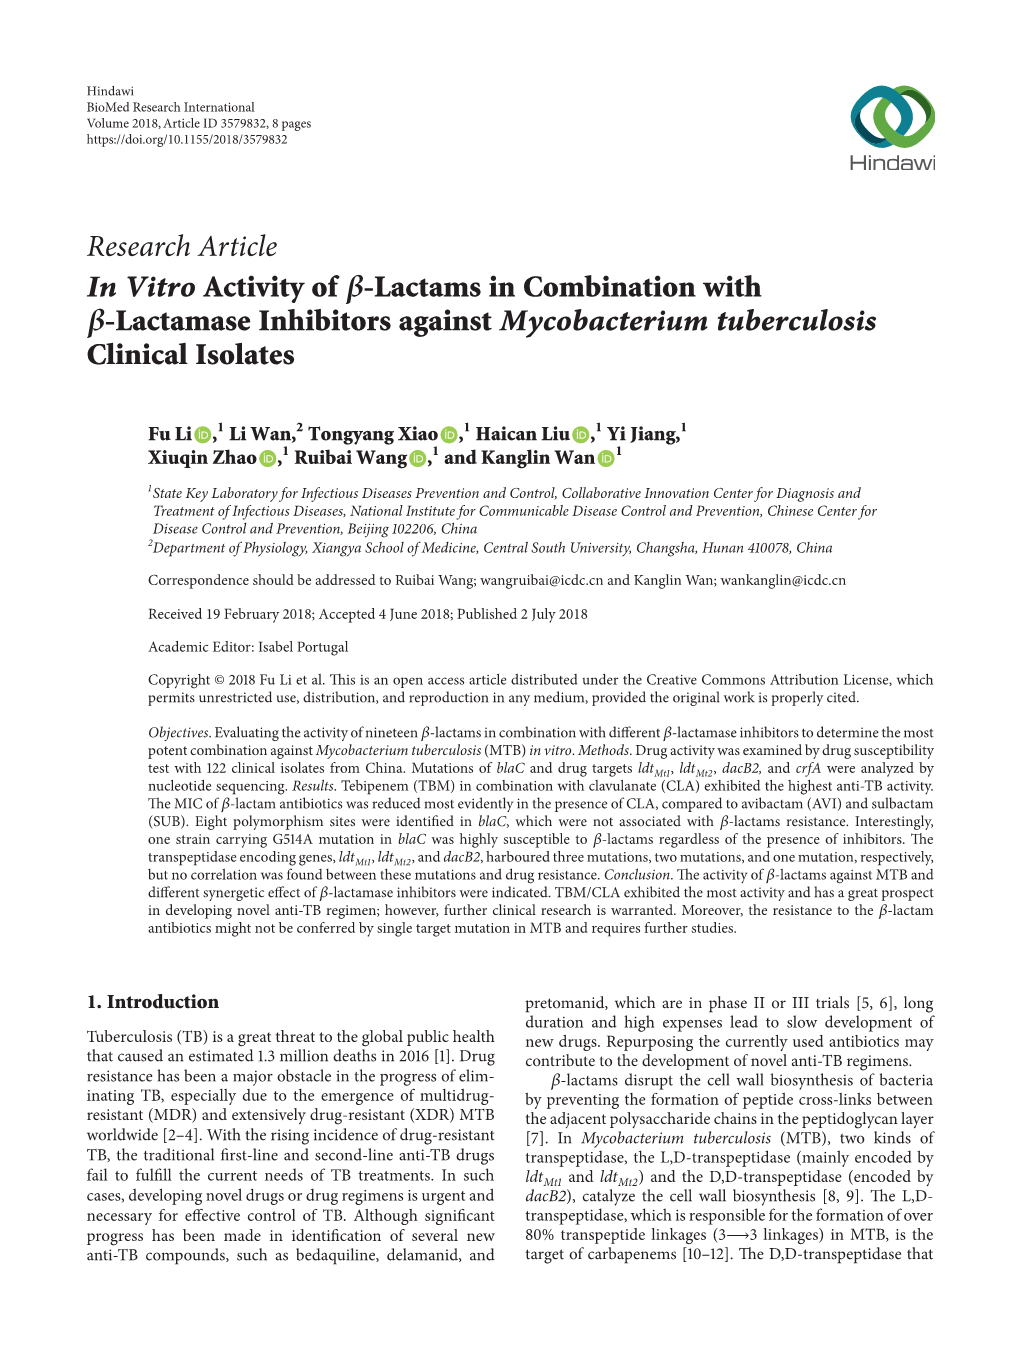 Lactams in Combination with -Lactamase Inhibitors Against